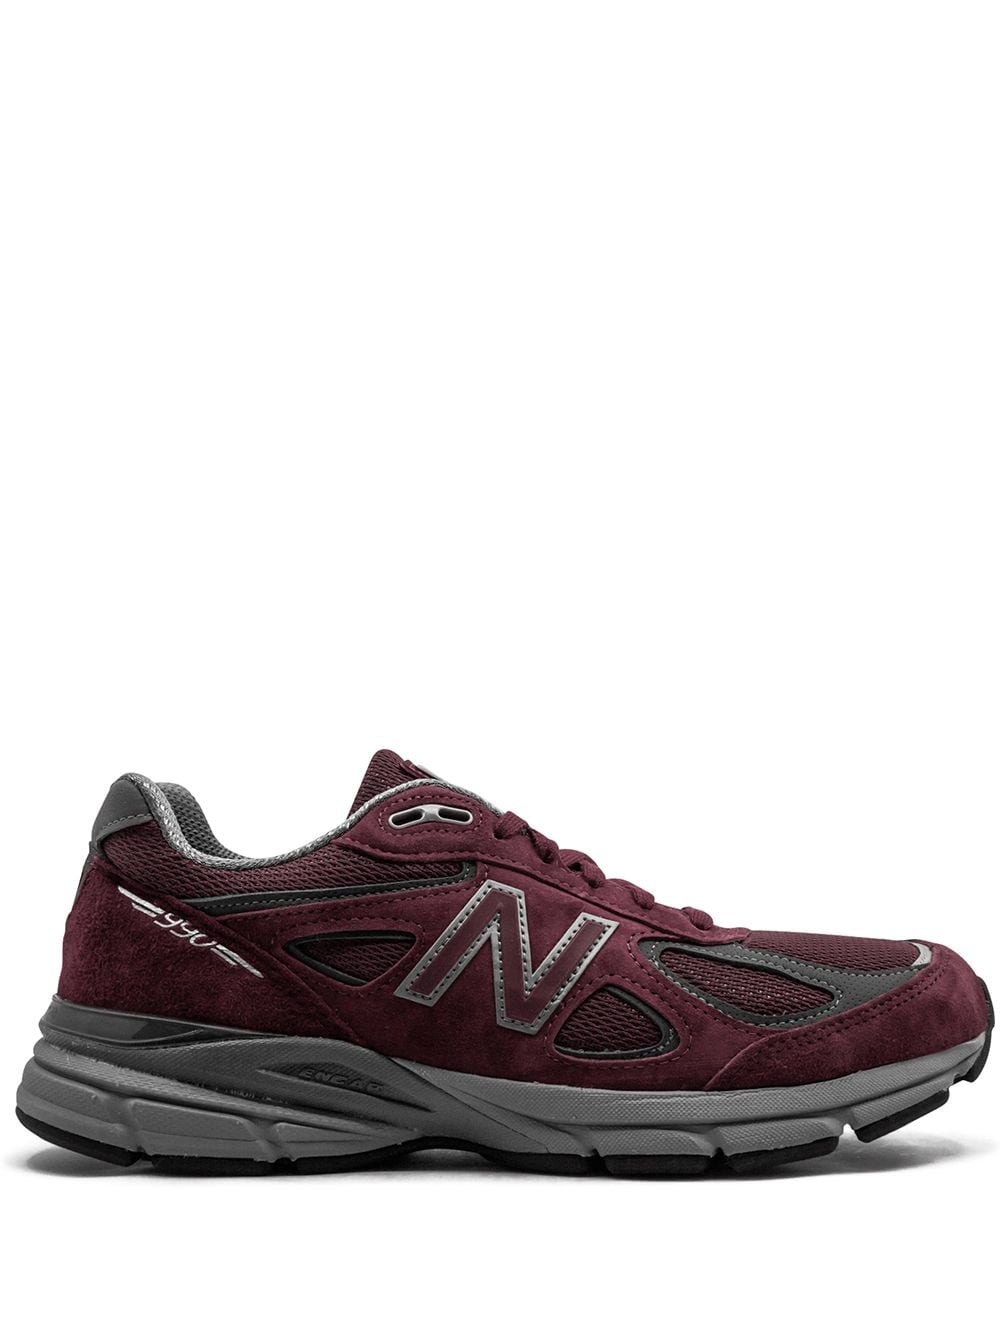 New Balance 990v4 sneakers - Red